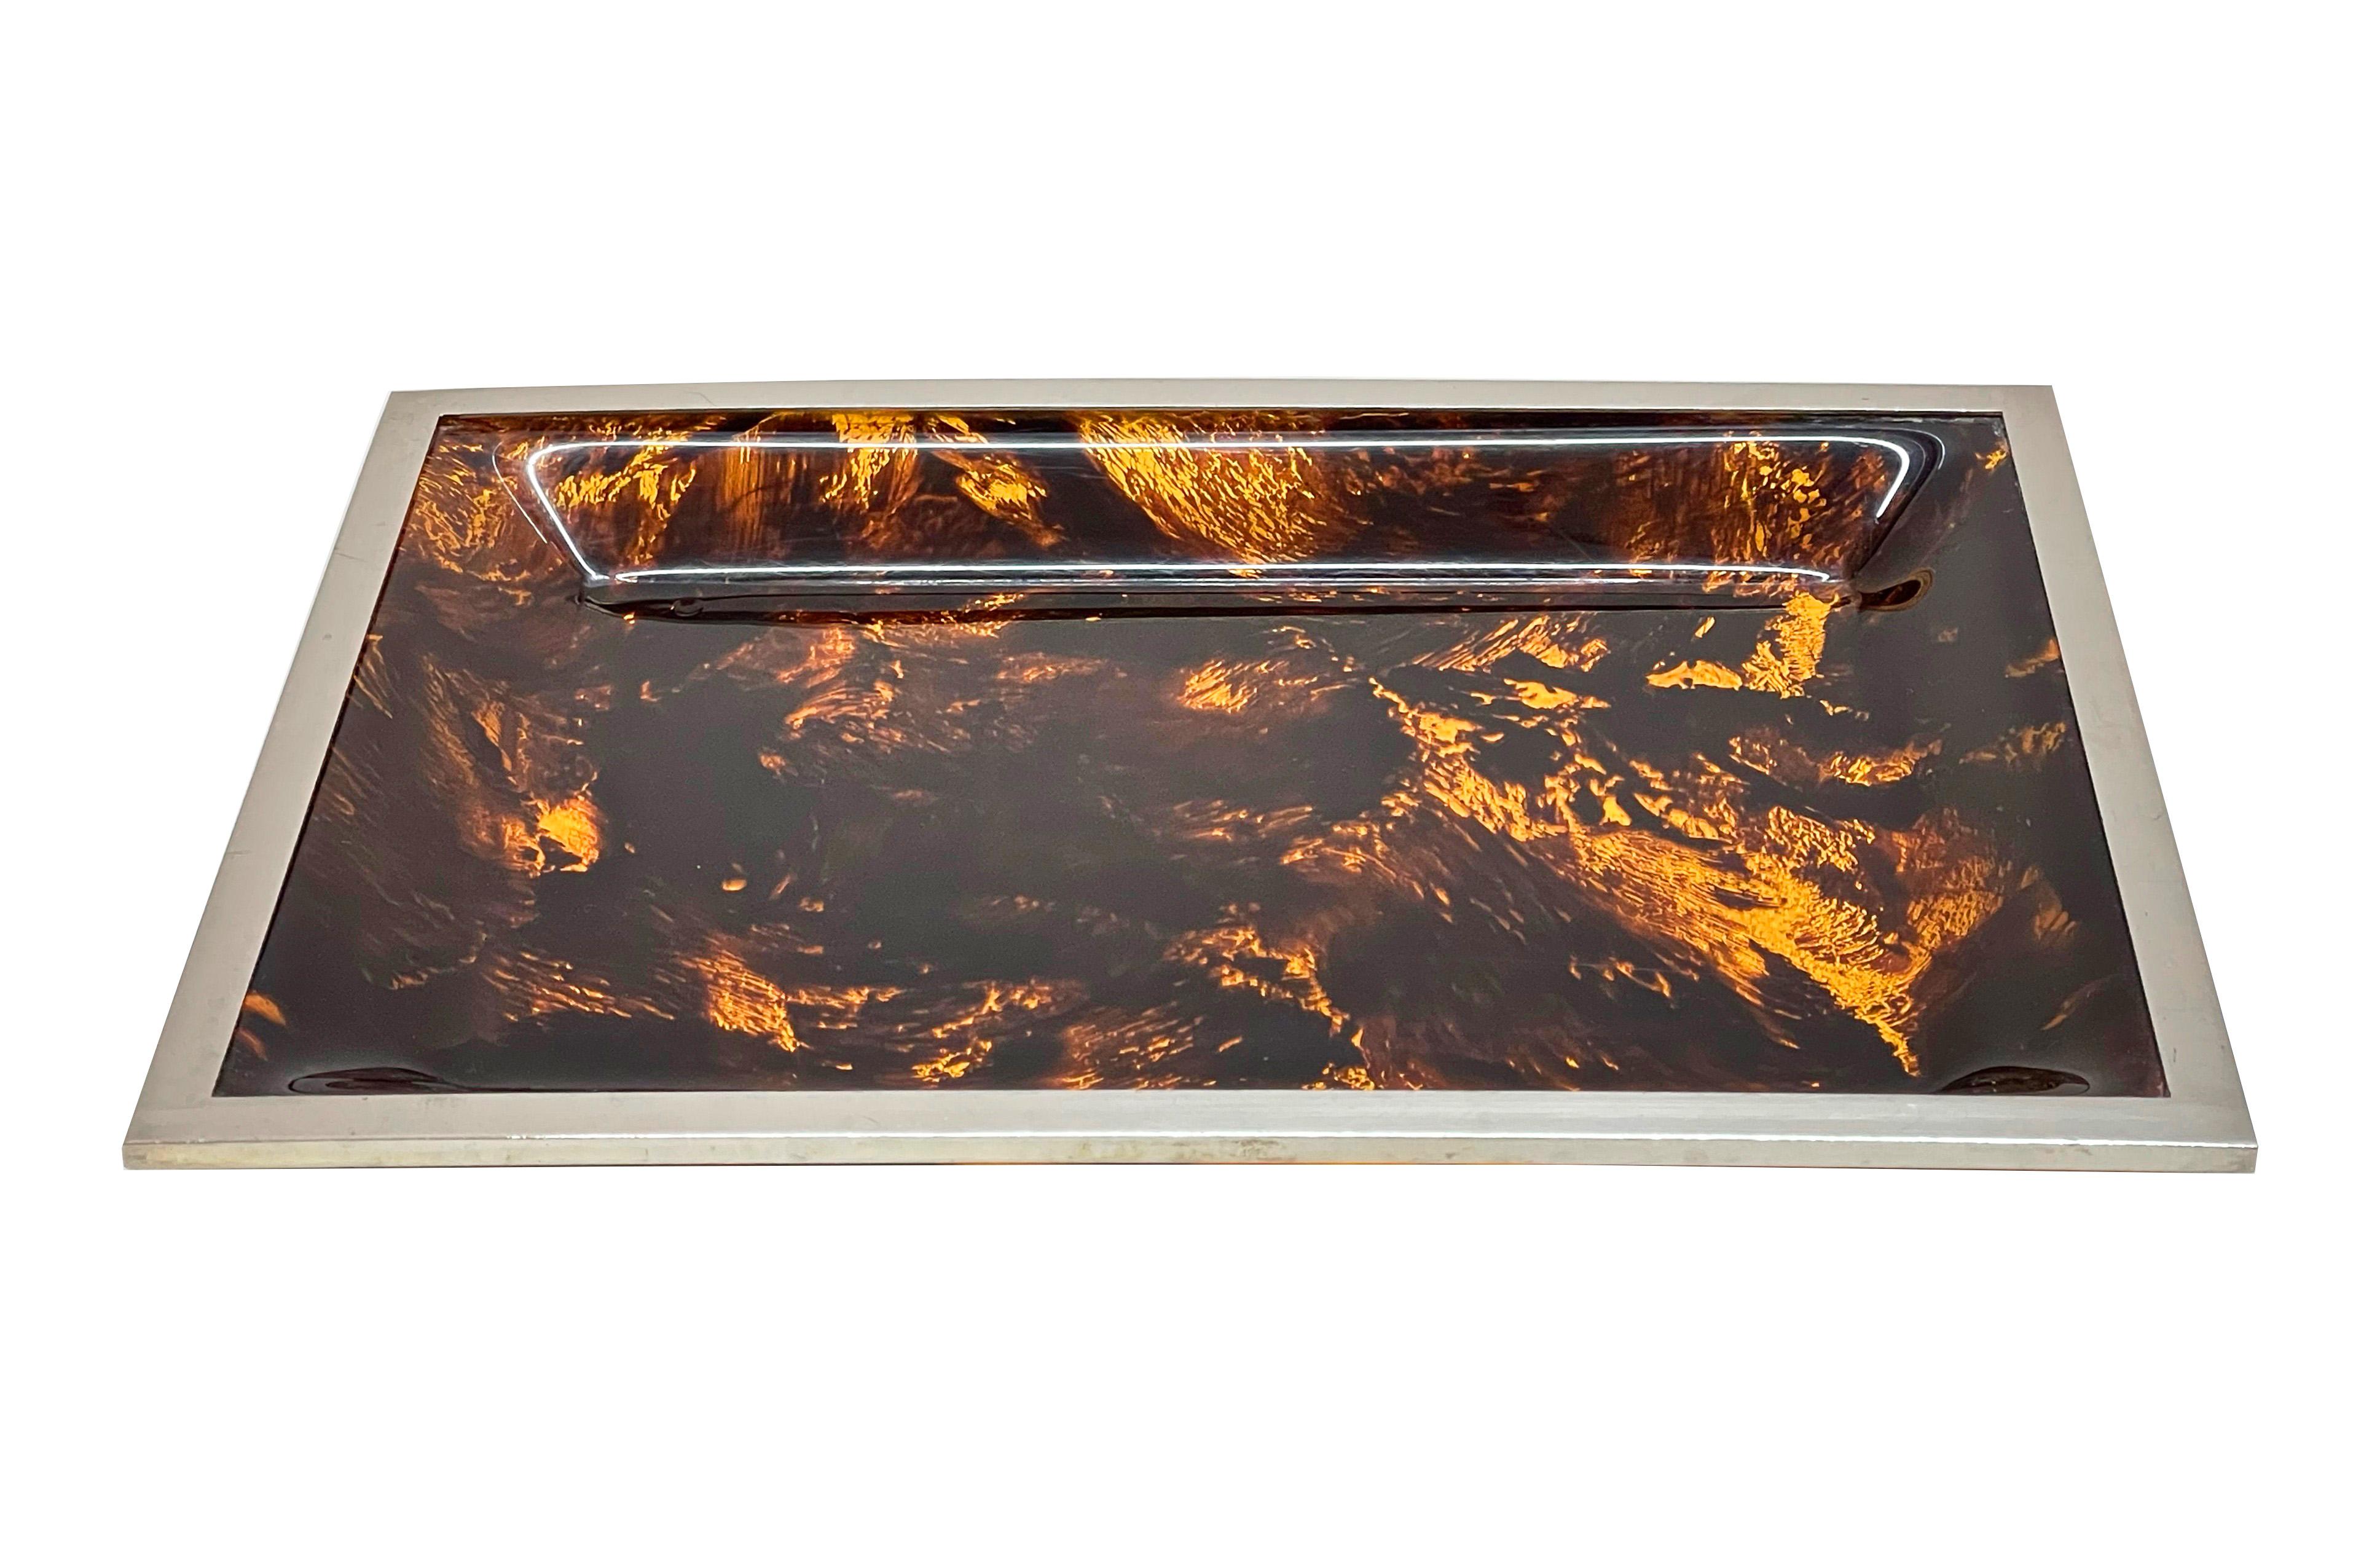 Midcentury Tortoiseshell Plexiglass Italian Serving Tray after Willy Rizzo 1970s For Sale 3